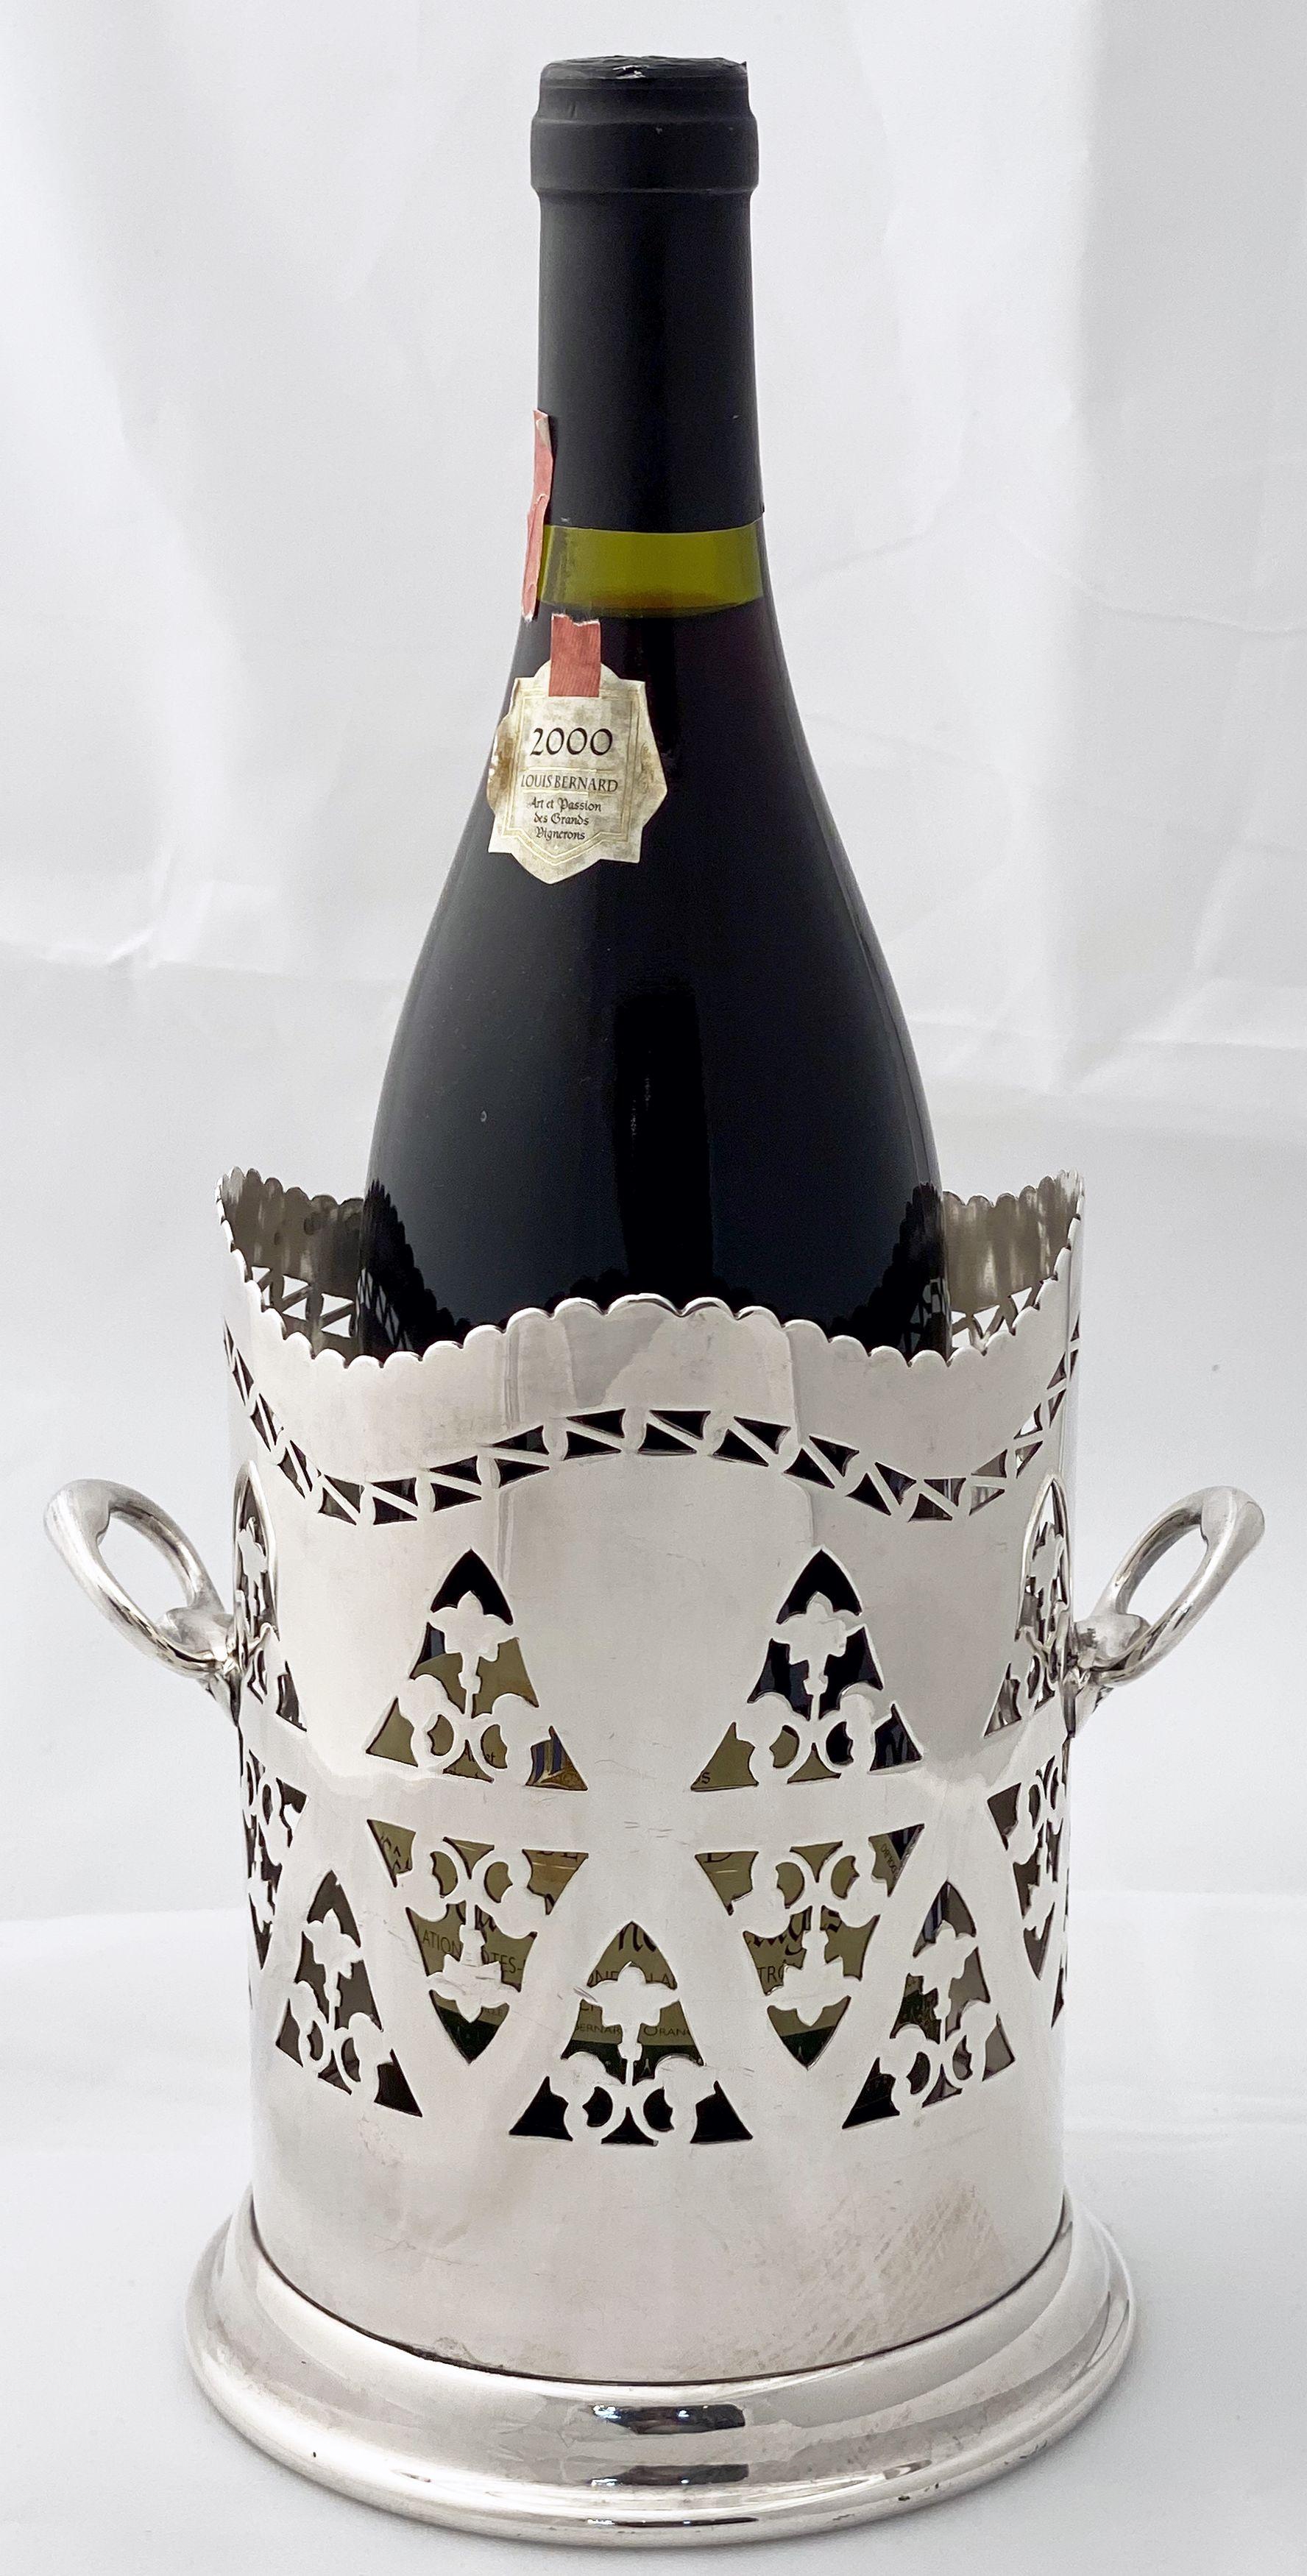 A handsome English wine bottle display holder or coaster of fine plate silver, featuring a serpentine scalloped top edge, pierced design around the circumference, opposing handles, and raised cylindrical base.

Designed to add a fine level of